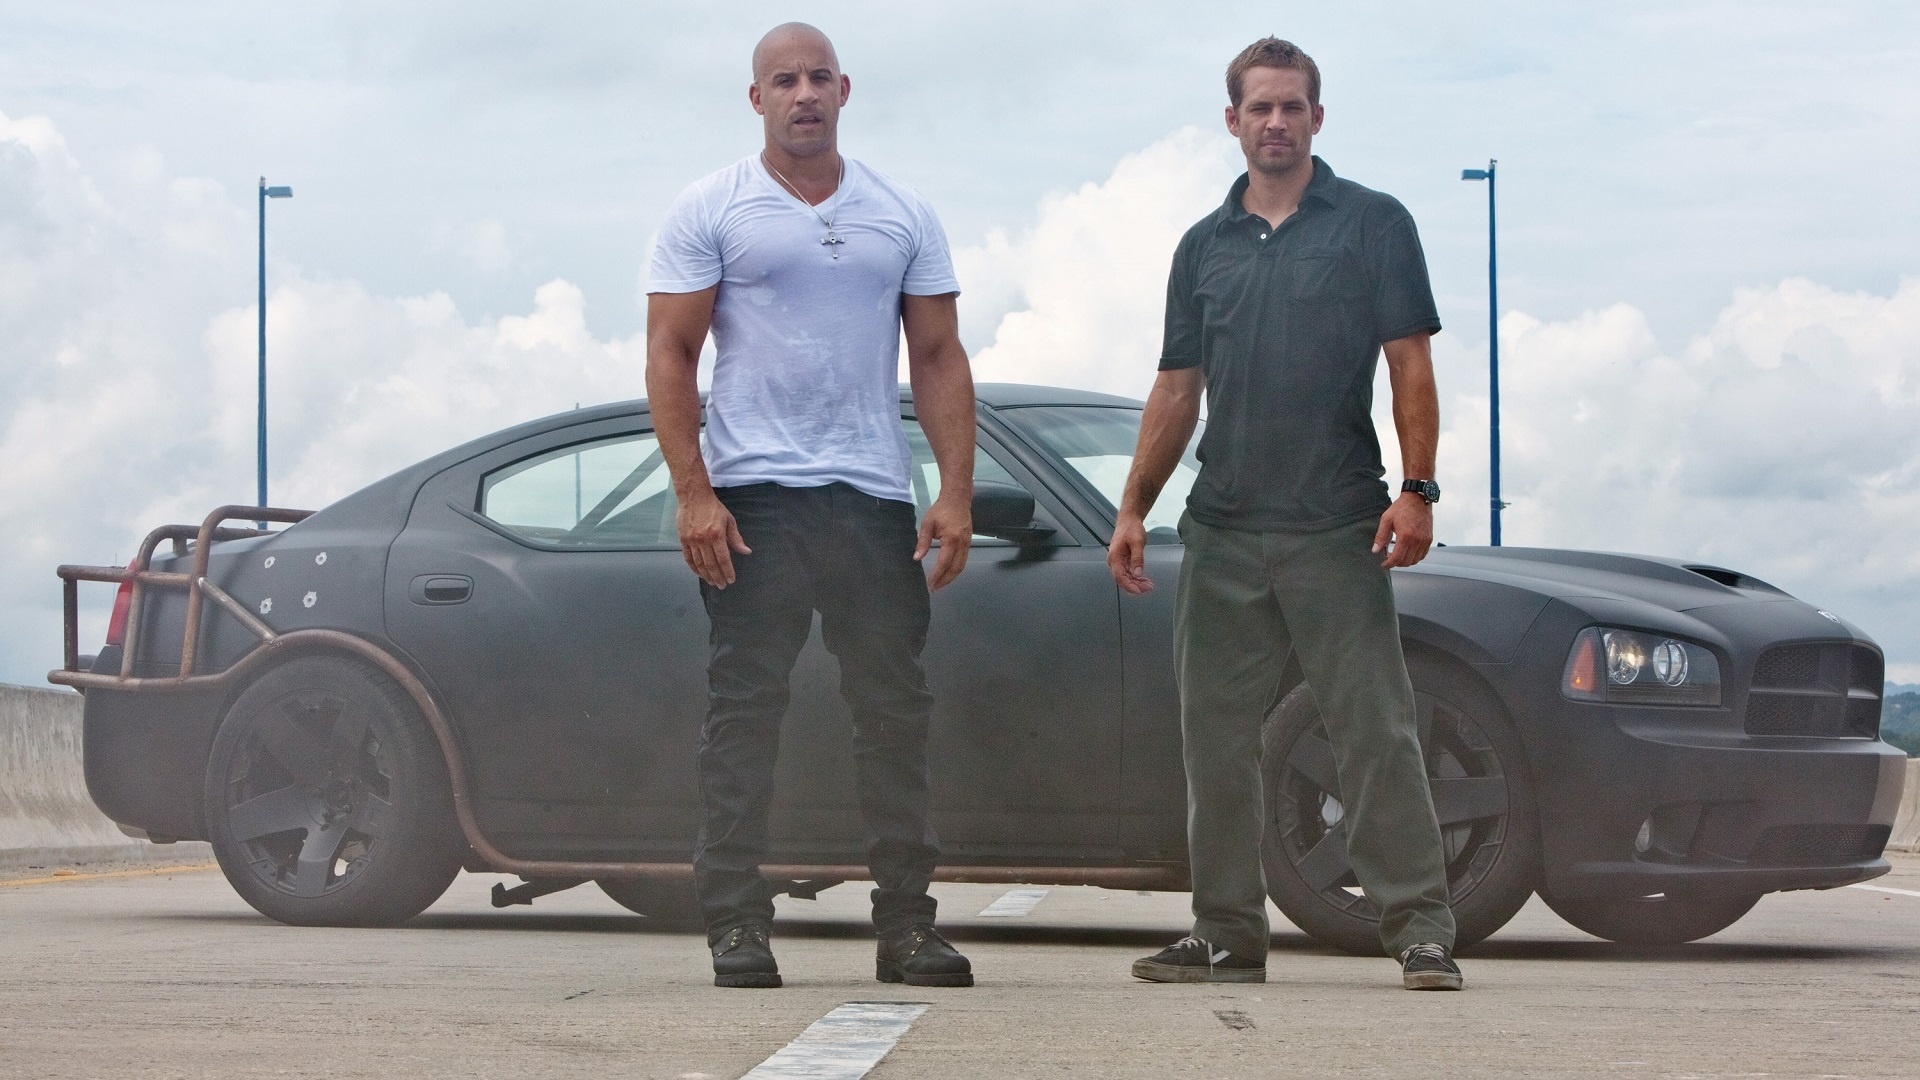 The Fast and the Furious, Wallpaper, Fast and Furious, Fanpop, 1920x1080 Full HD Desktop